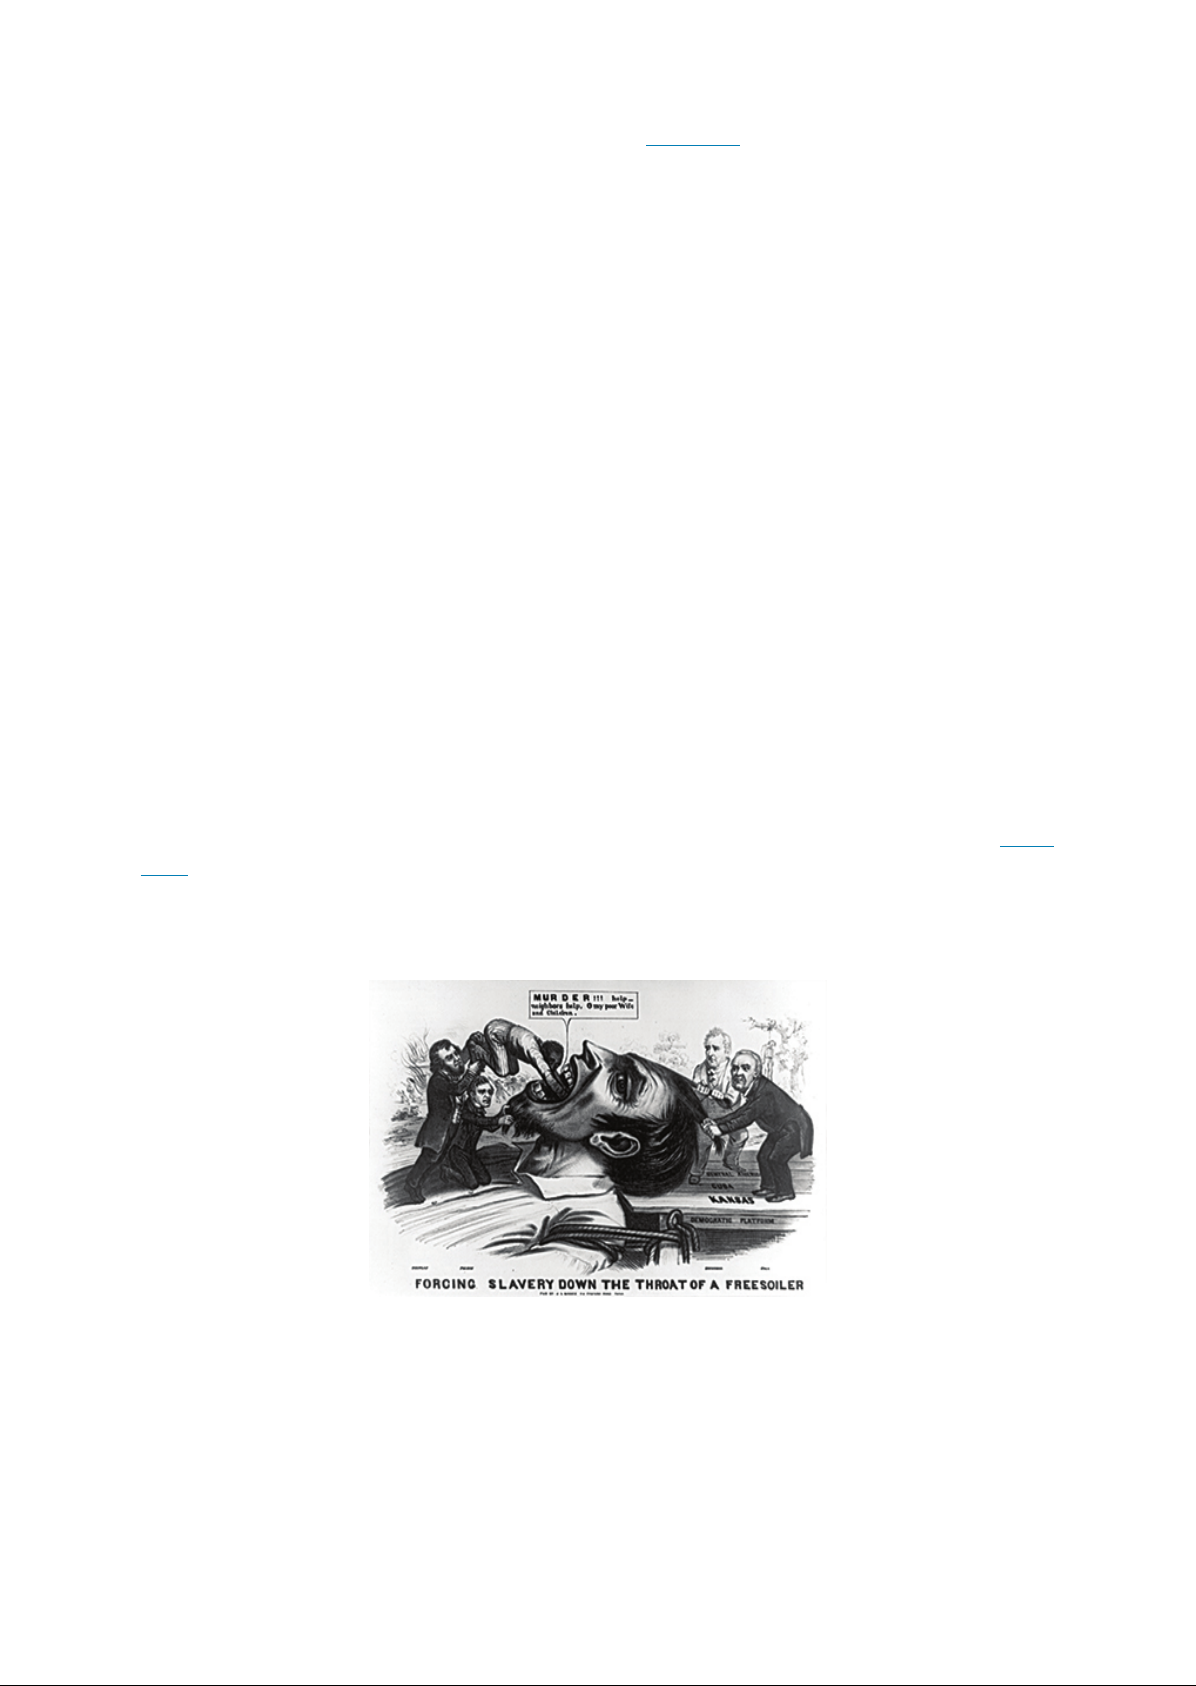 Troubled_Times__the_Tumultuous_1850s Image-12